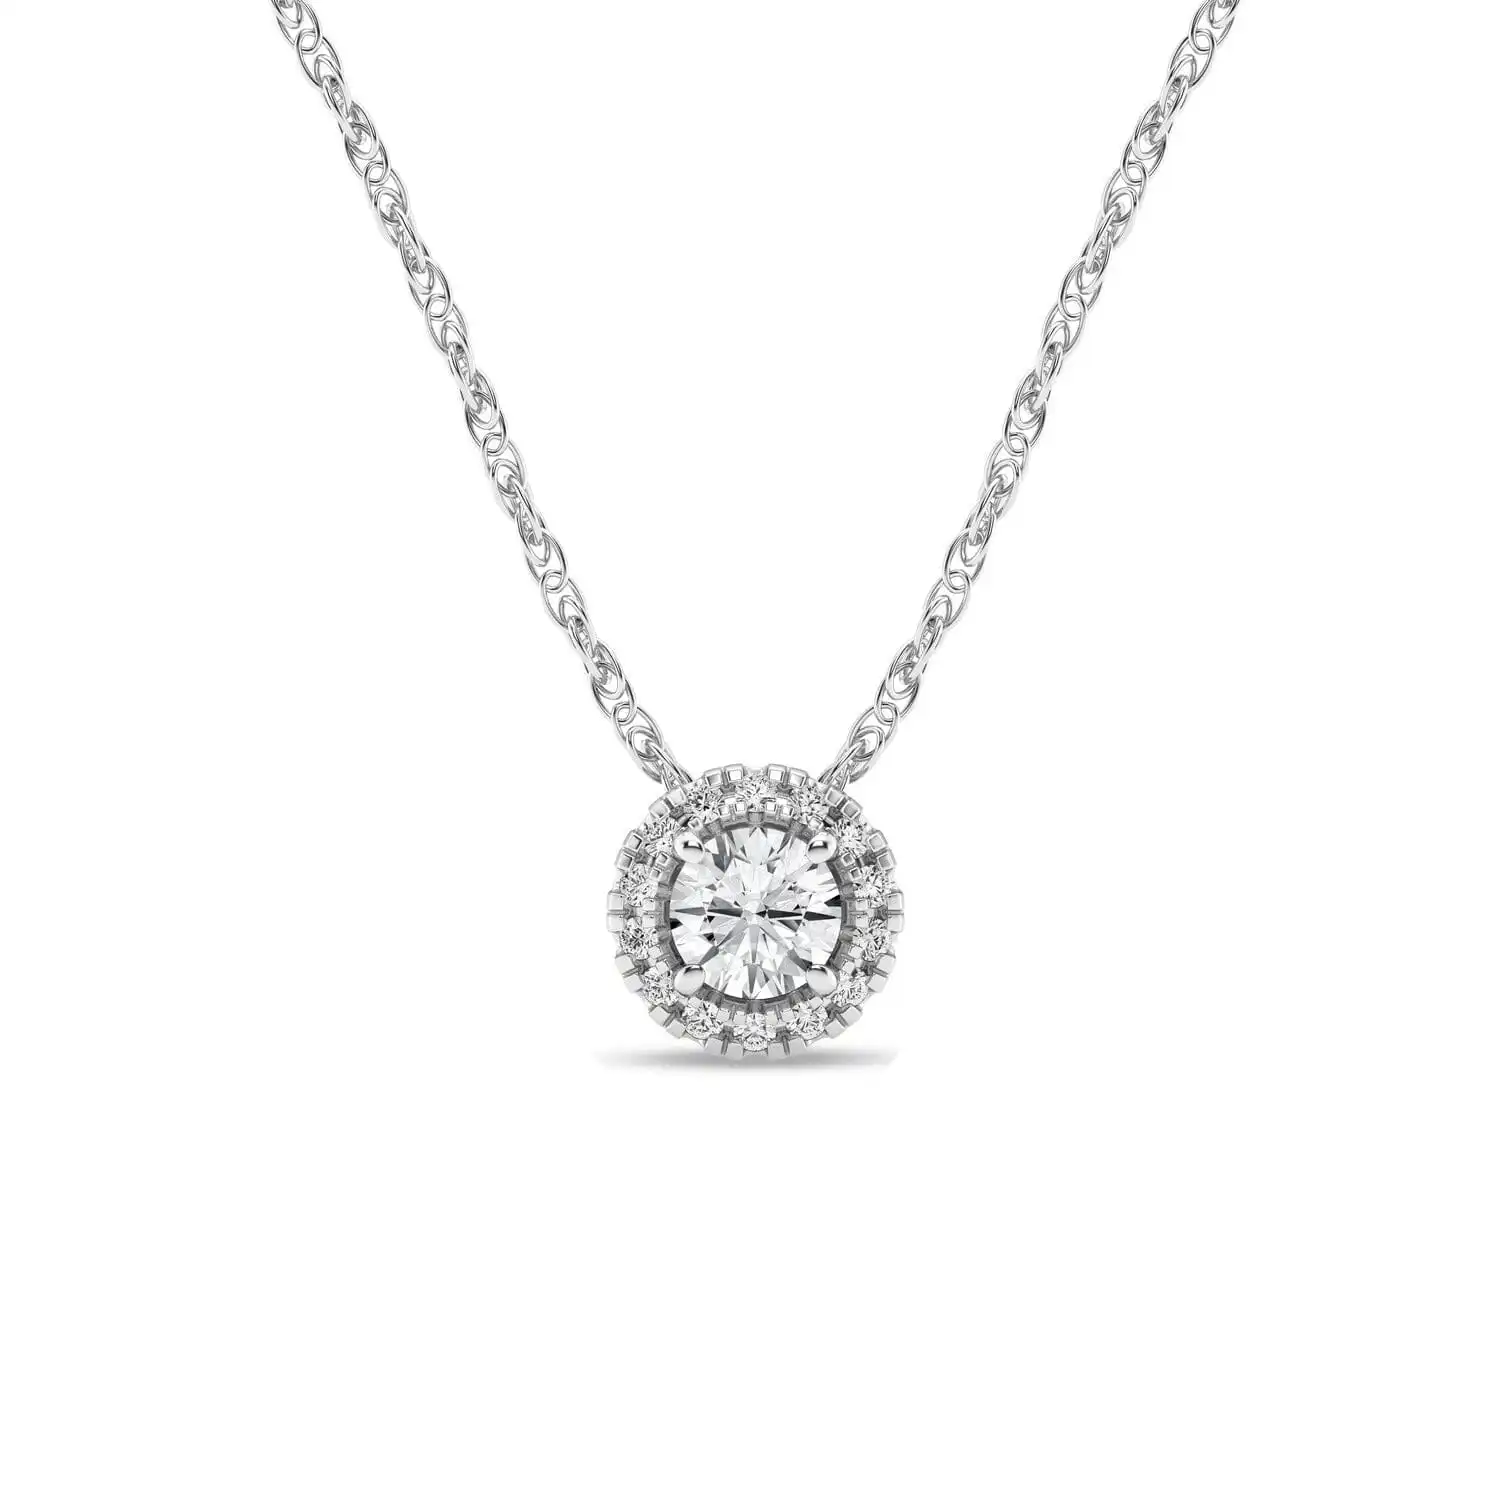 Meera Halo Solitaire Necklace with 1/4ct of Laboratory Grown Diamonds in 9ct White Gold